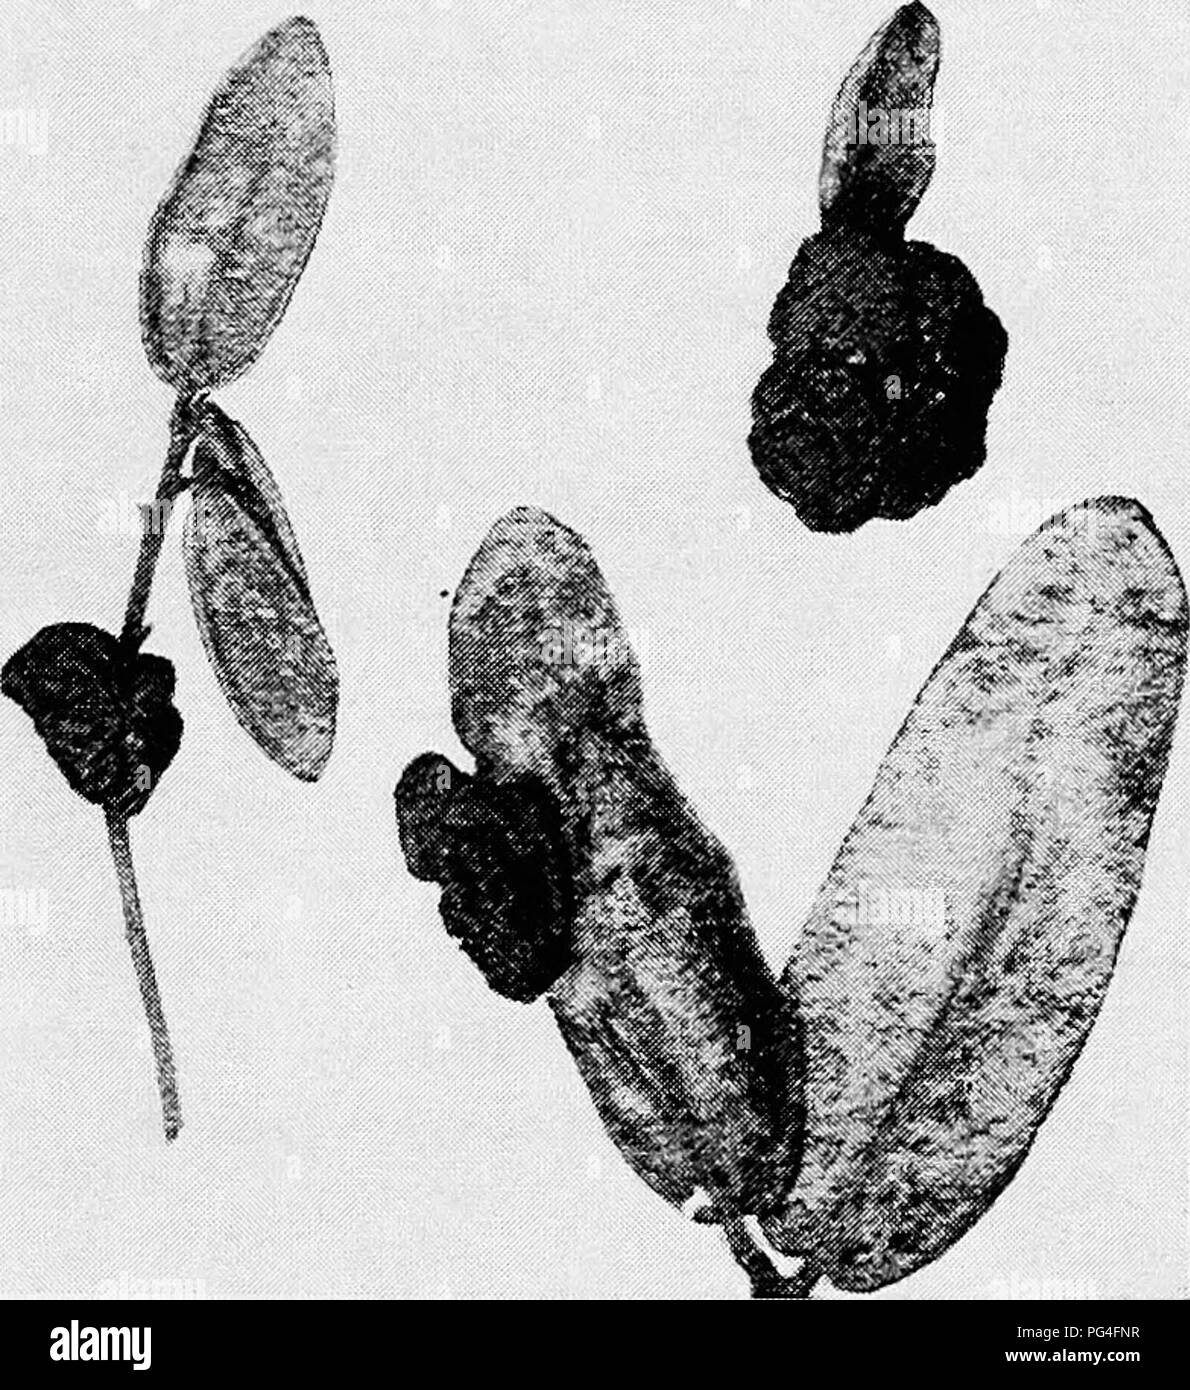 . Minnesota plant diseases. Plant diseases. Minnesota Plant Diseases. 83 (b) Many rusts have remarkable powers of stimulation, not only in their influence on size but also in the age of parts. Al- though a host plant may bear the load of such a parasite the fungus may still stimulate it sufificiently to enable it to maintain its normal age relationships so that the fungus and host may live together for years. In the darnel grass lives a smut-hke fungus which is parasitic and which infects the embryo in the seed before the latter is ripe, and thus this fungus lives on from year to year in- fect Stock Photo